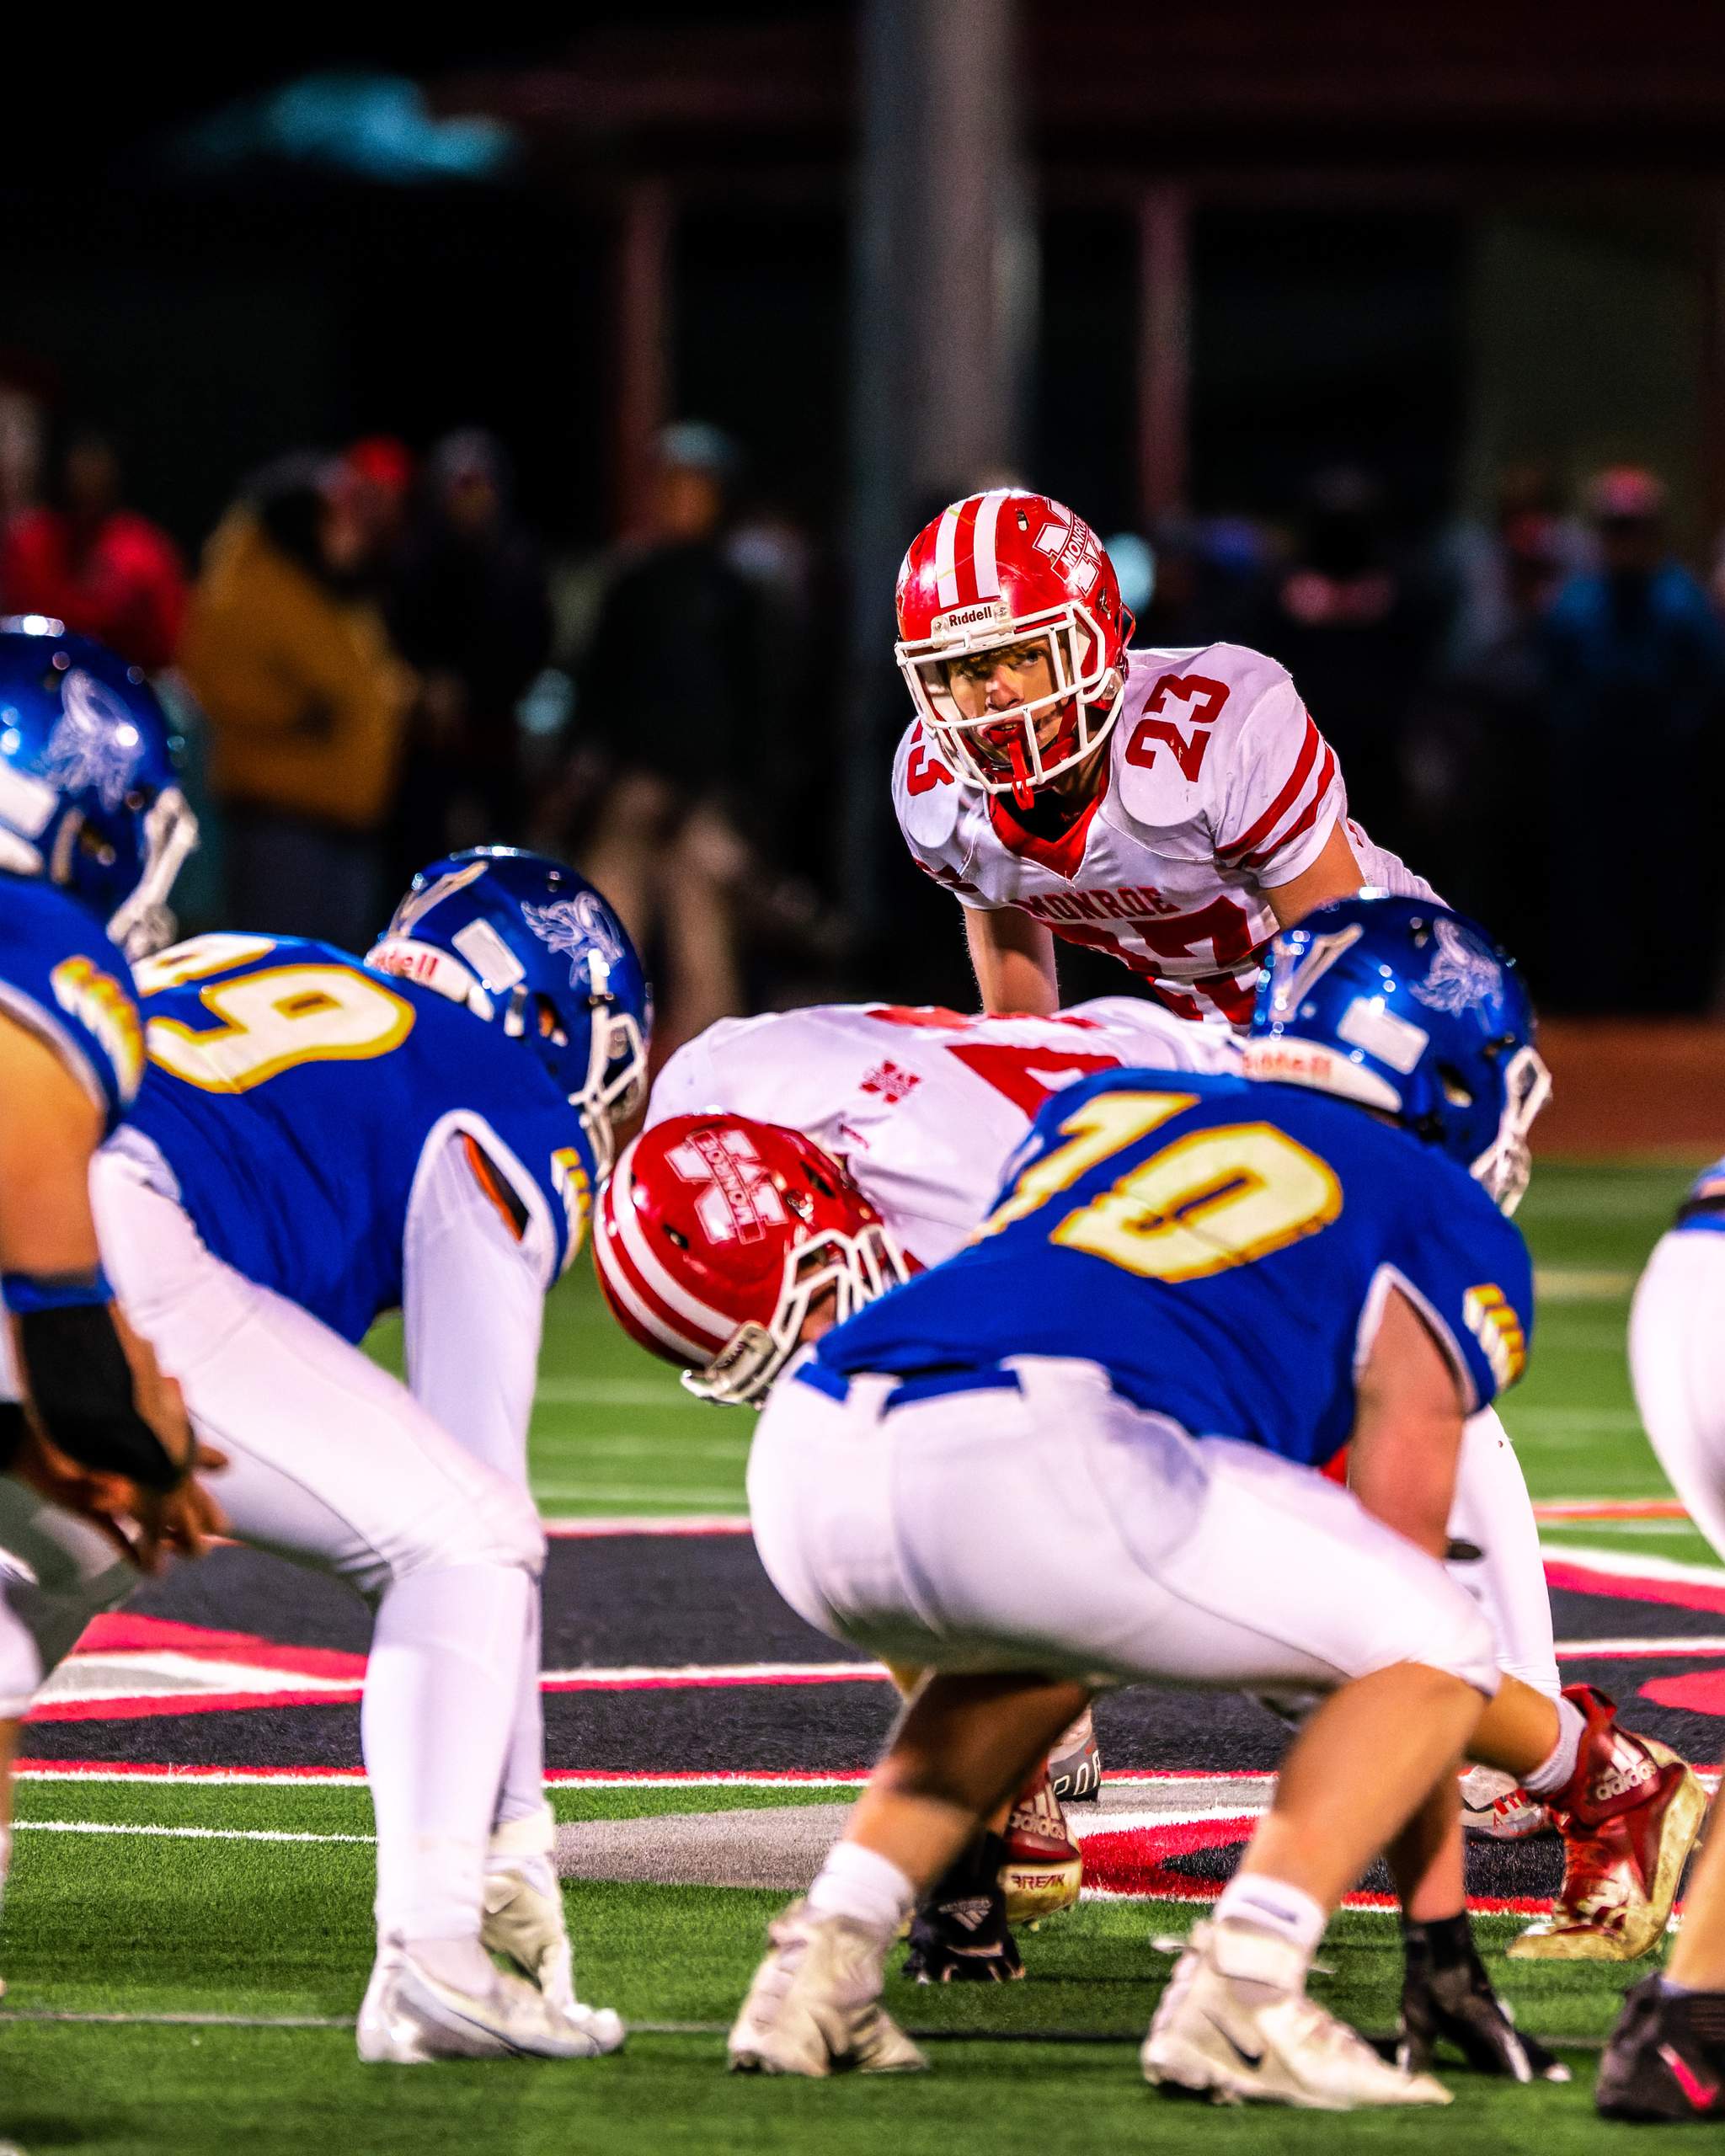 Monroe vs. New Berlin West, Round 4 of the 2022 WIAA Playoffs, photography by Ross Harried for Second Crop Sports